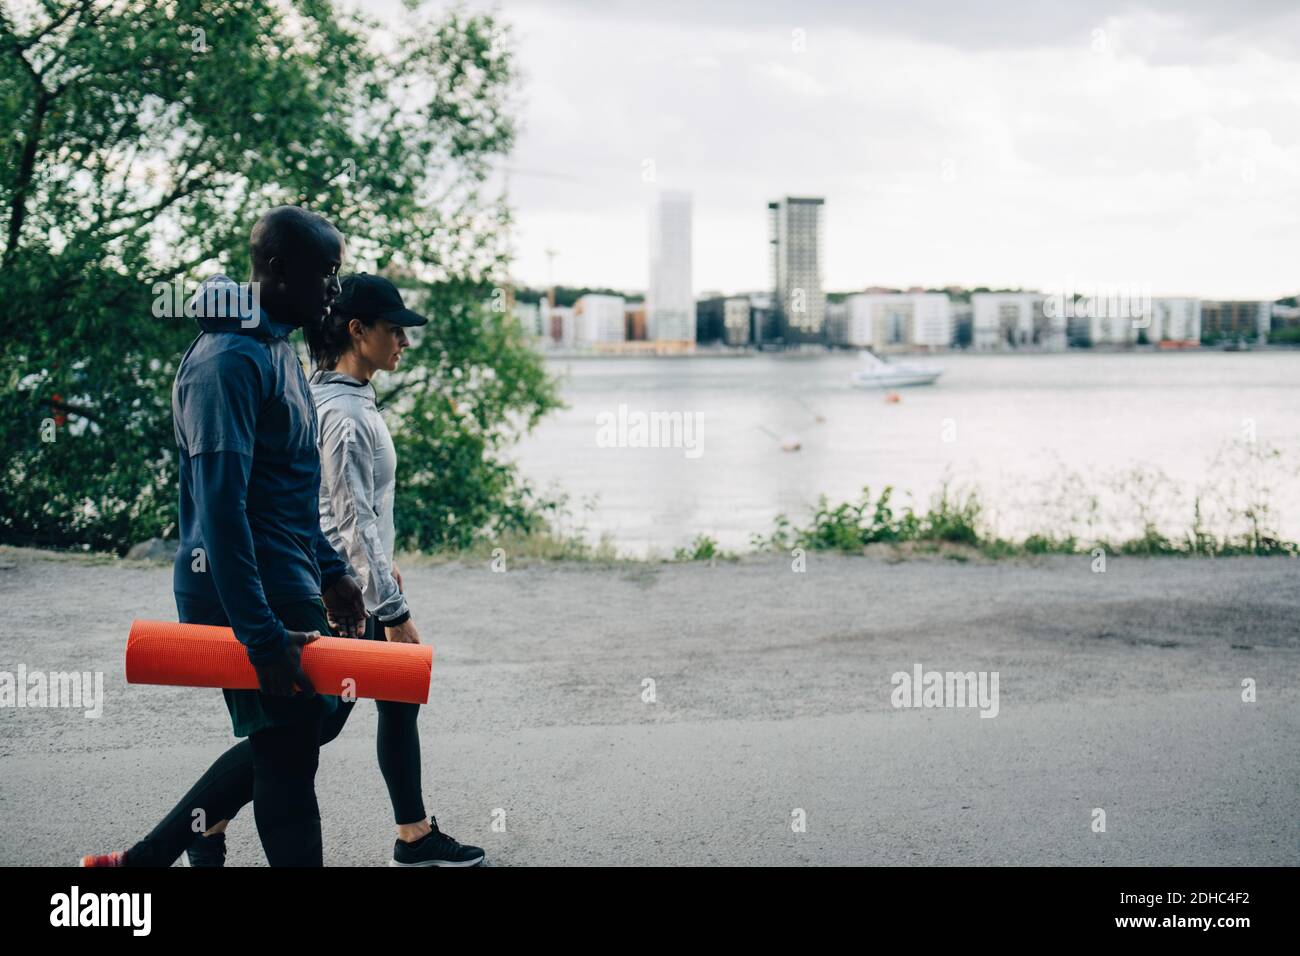 Male athlete holding yoga mat while walking with female friend on road in city Stock Photo